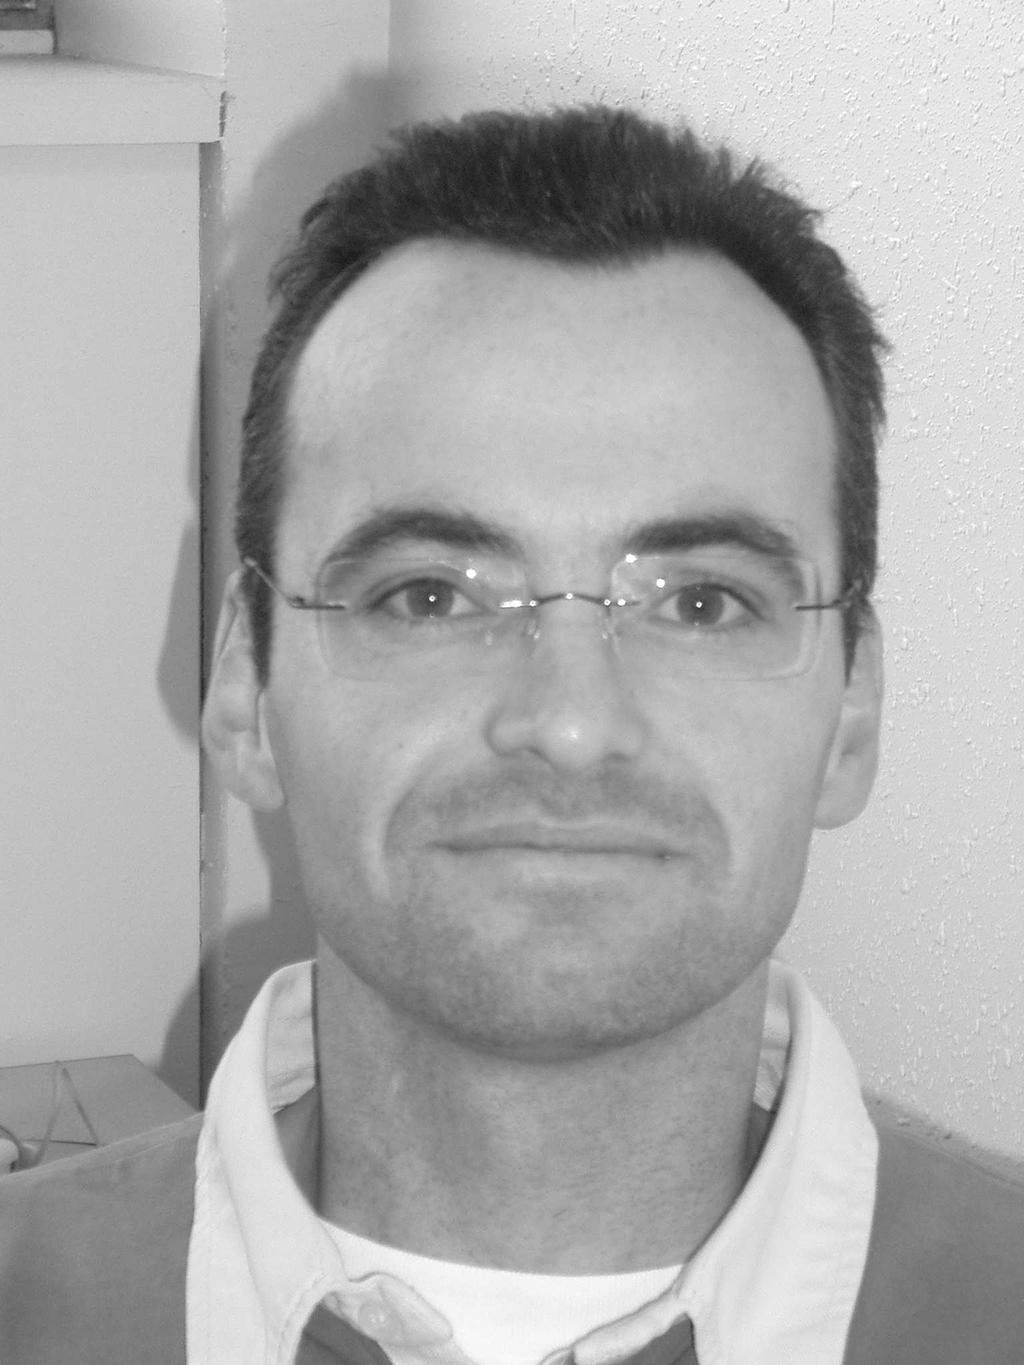 IEEE TRANSACTIONS ON NETWORK AND SERVICE MANAGEMENT 1 Bruno Tuffin received his PhD degree in applied mathematics from the University of Rennes 1 (France) in 1997.